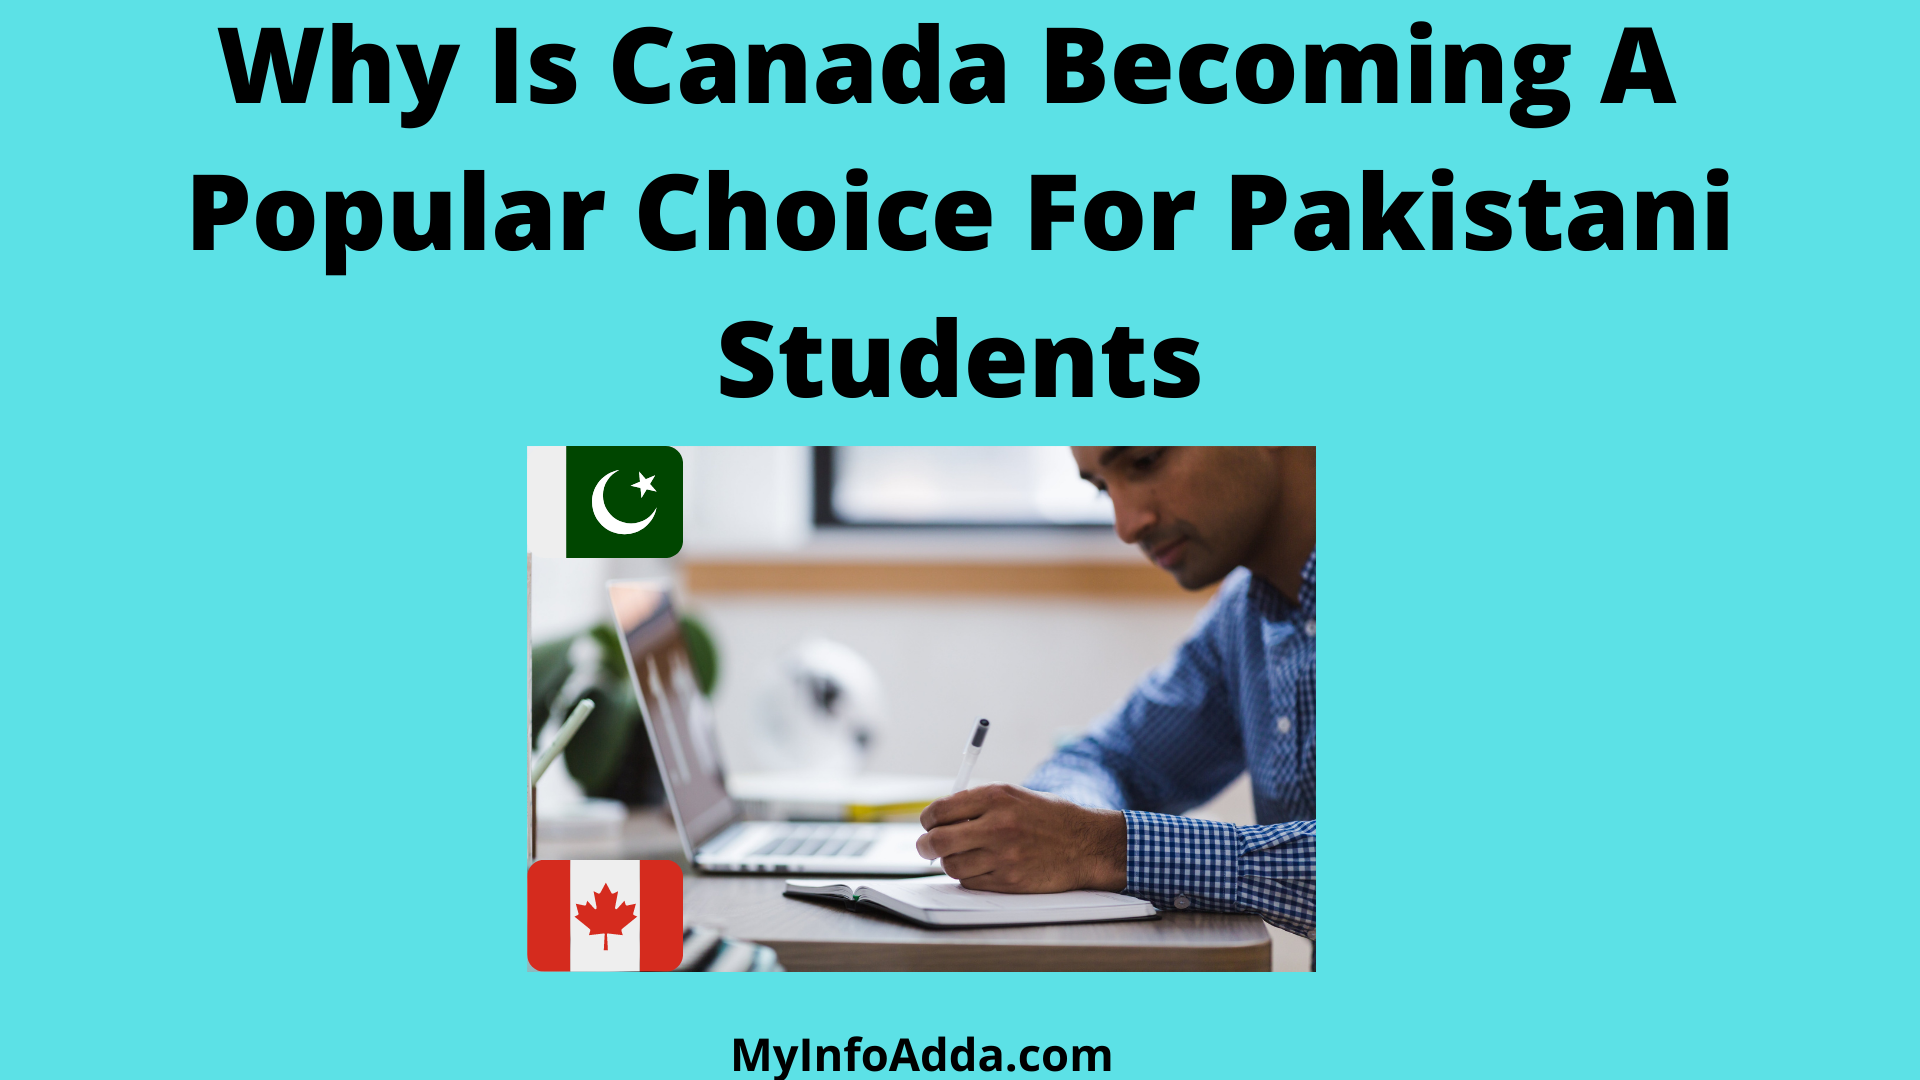 Why Is Canada Becoming A Popular Choice For Pakistani Students